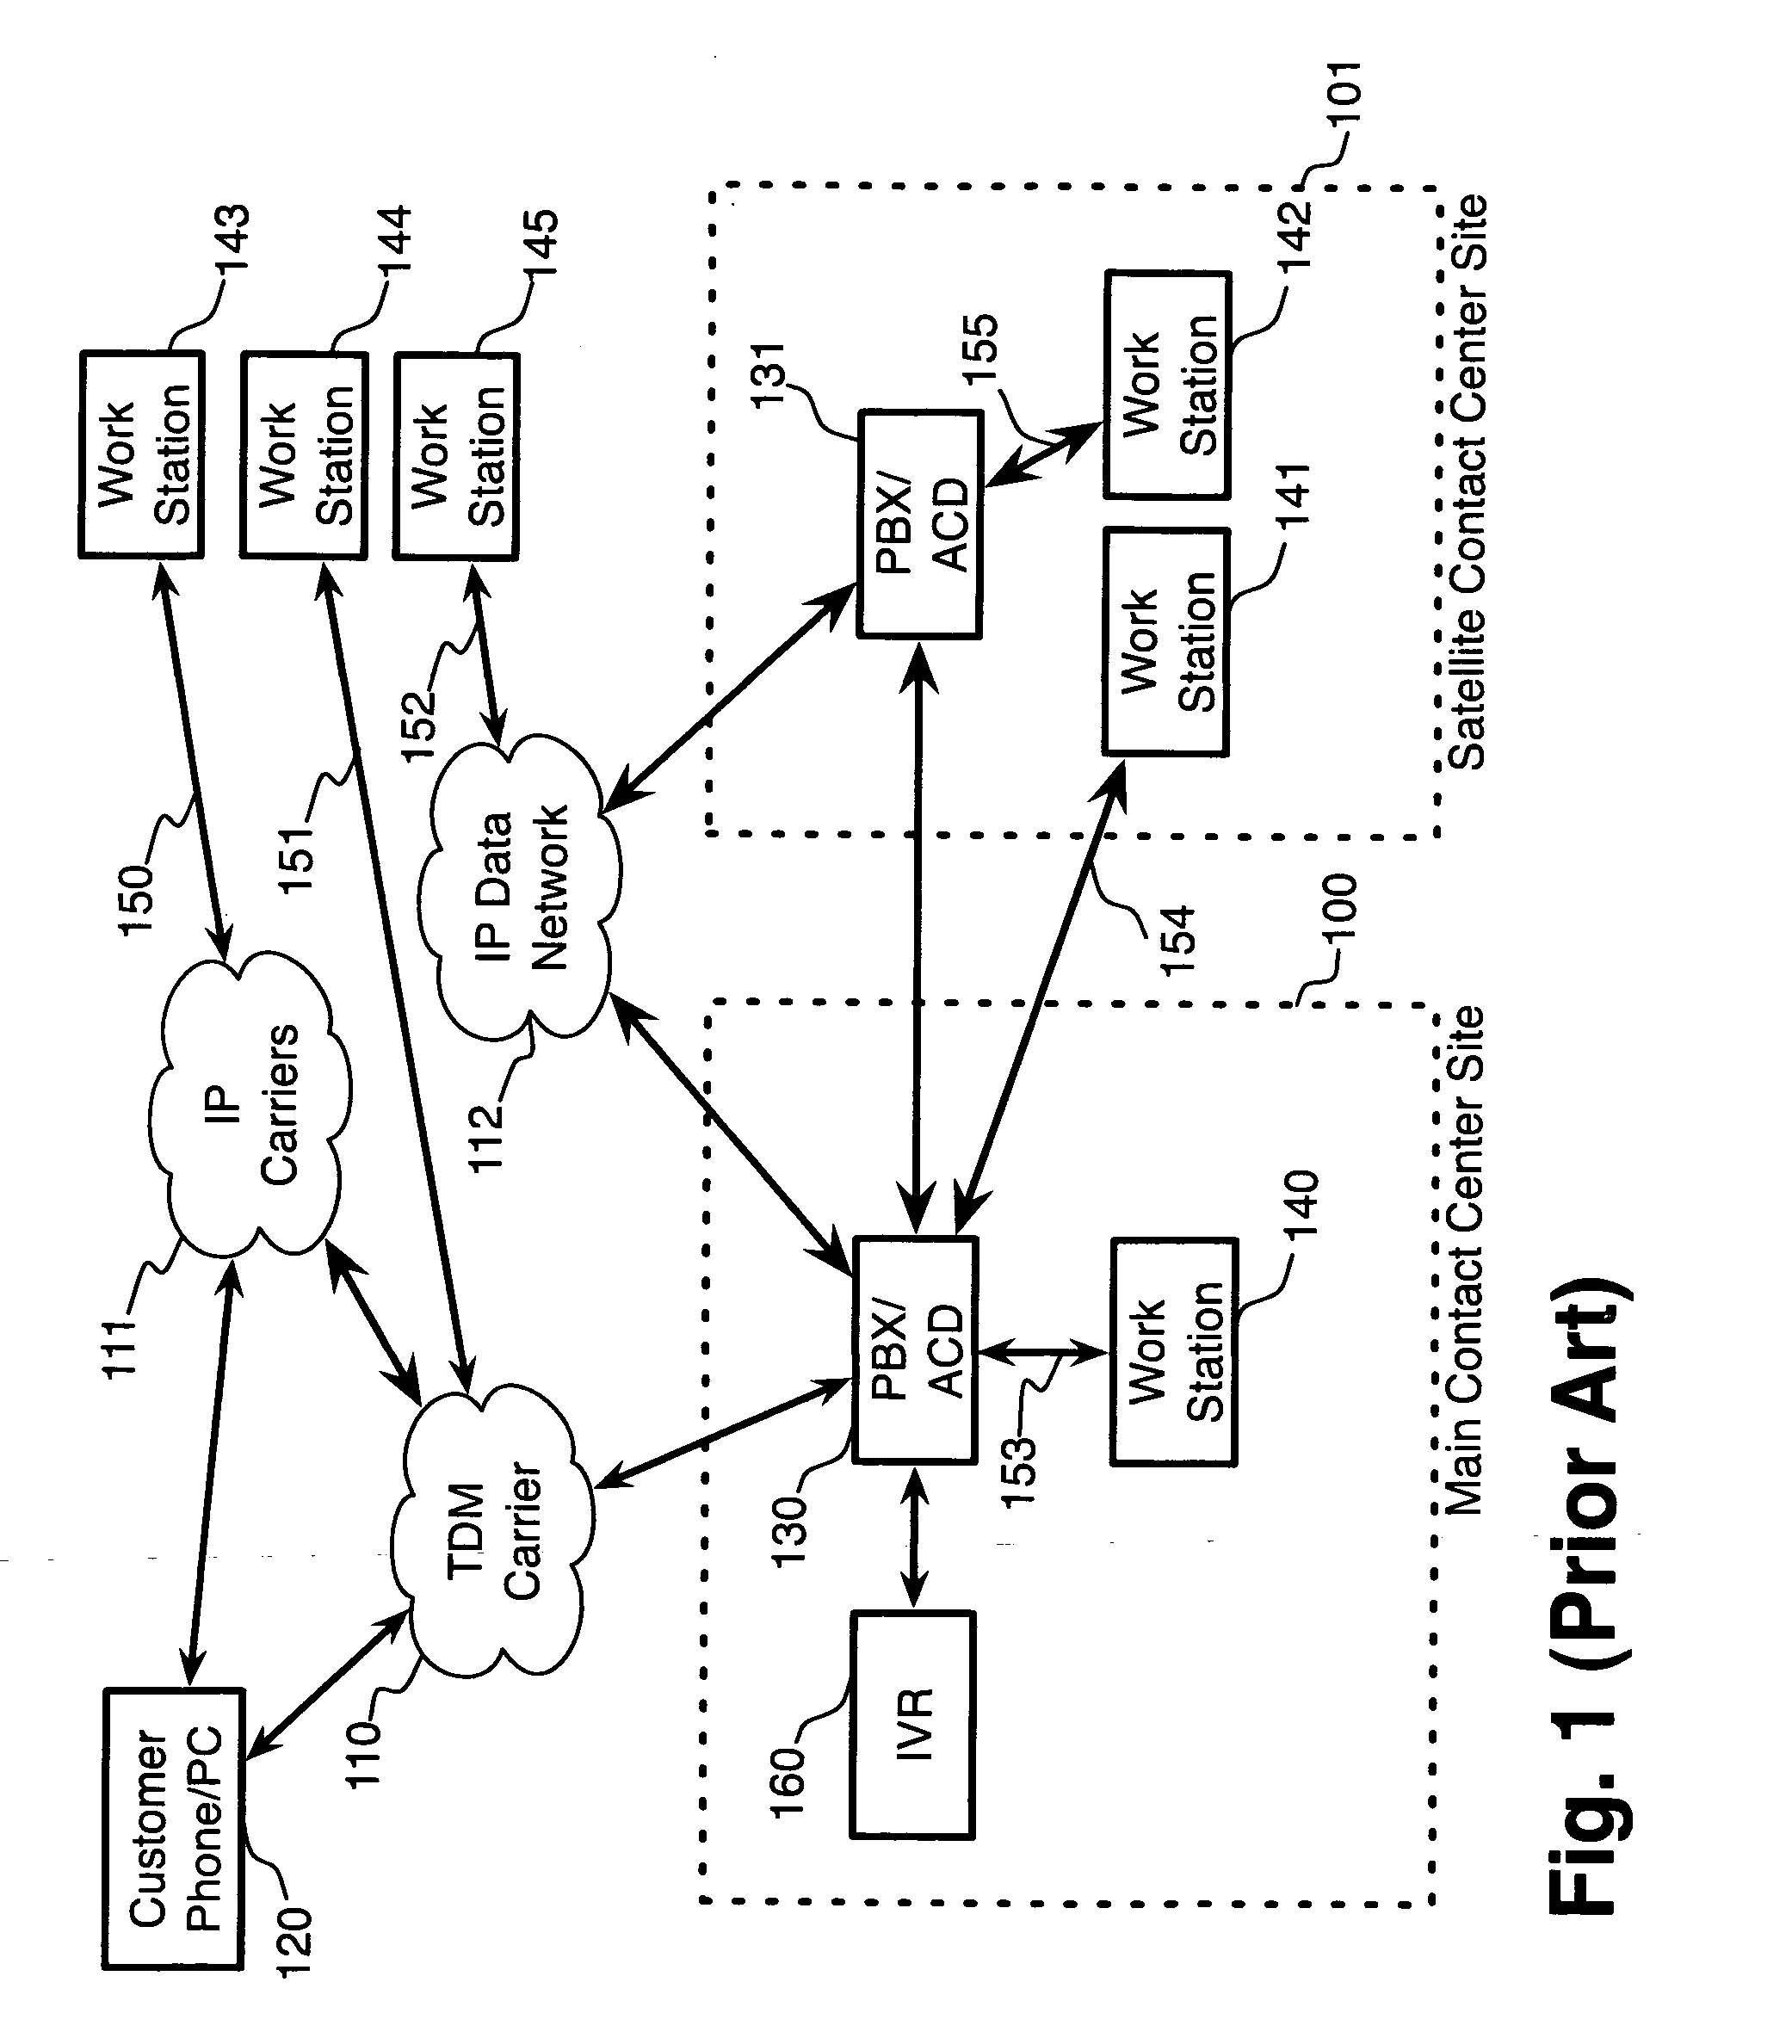 System and method for adaptive call management